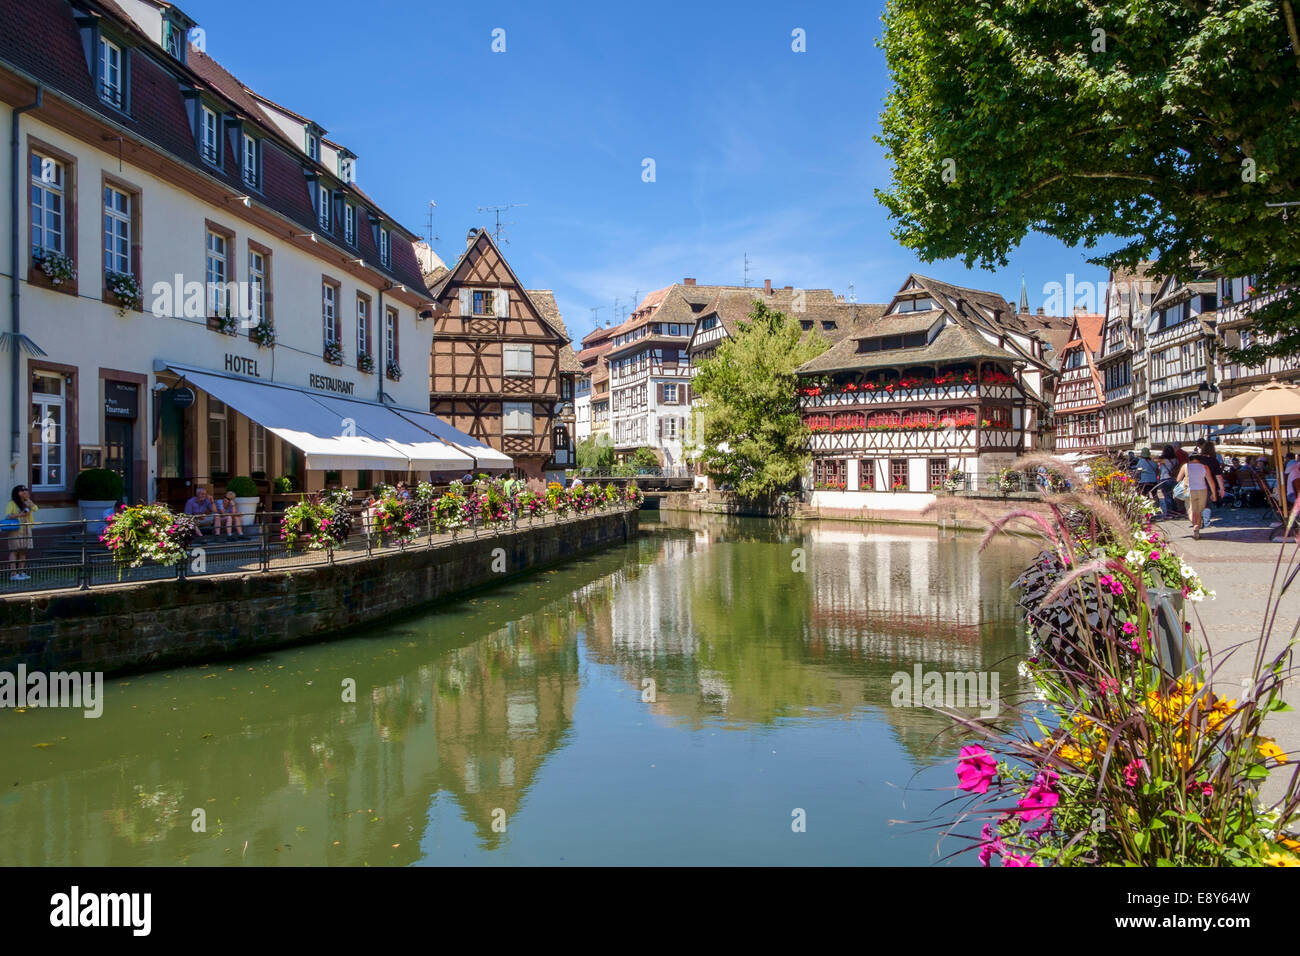 Strasbourg, France - Waterfront in Petite-France old district with medieval buildings and restaurants Stock Photo